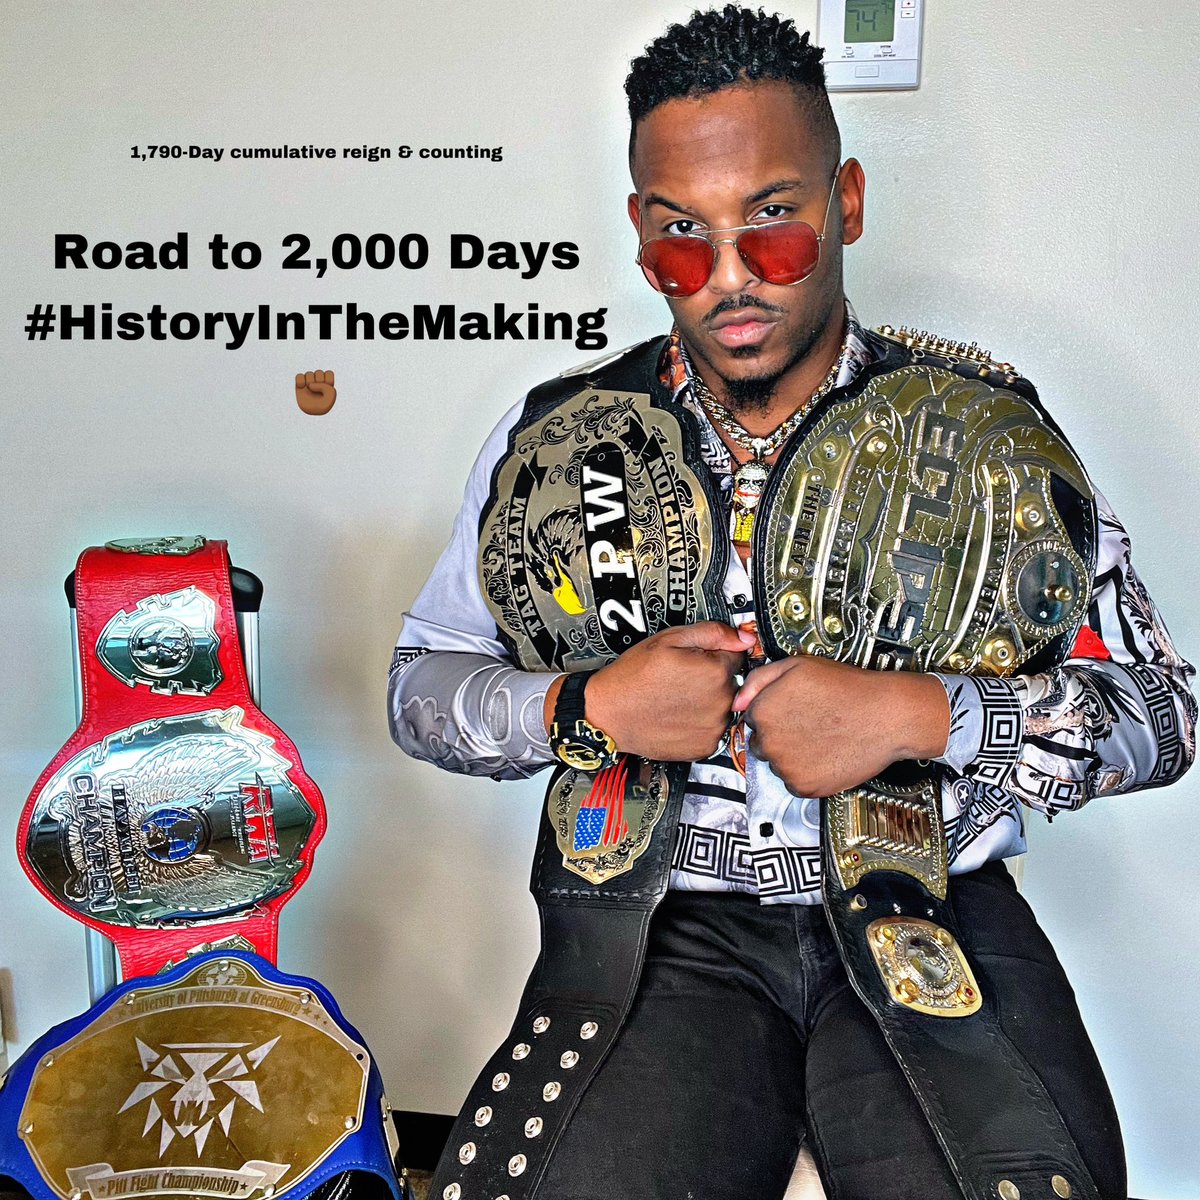 About last night…..AND STILL!! #Revy4Belts breaking records Eclipse Heavyweight - 827 Days PittFight Championship - 751 Days 2PW Tag - 128 Days 2x RWA Heavyweight - 84 Days (469 day prior reign) Cumulative Reign 1,790 days & COUNTING #ForTheCulture #TheRevRonHunt